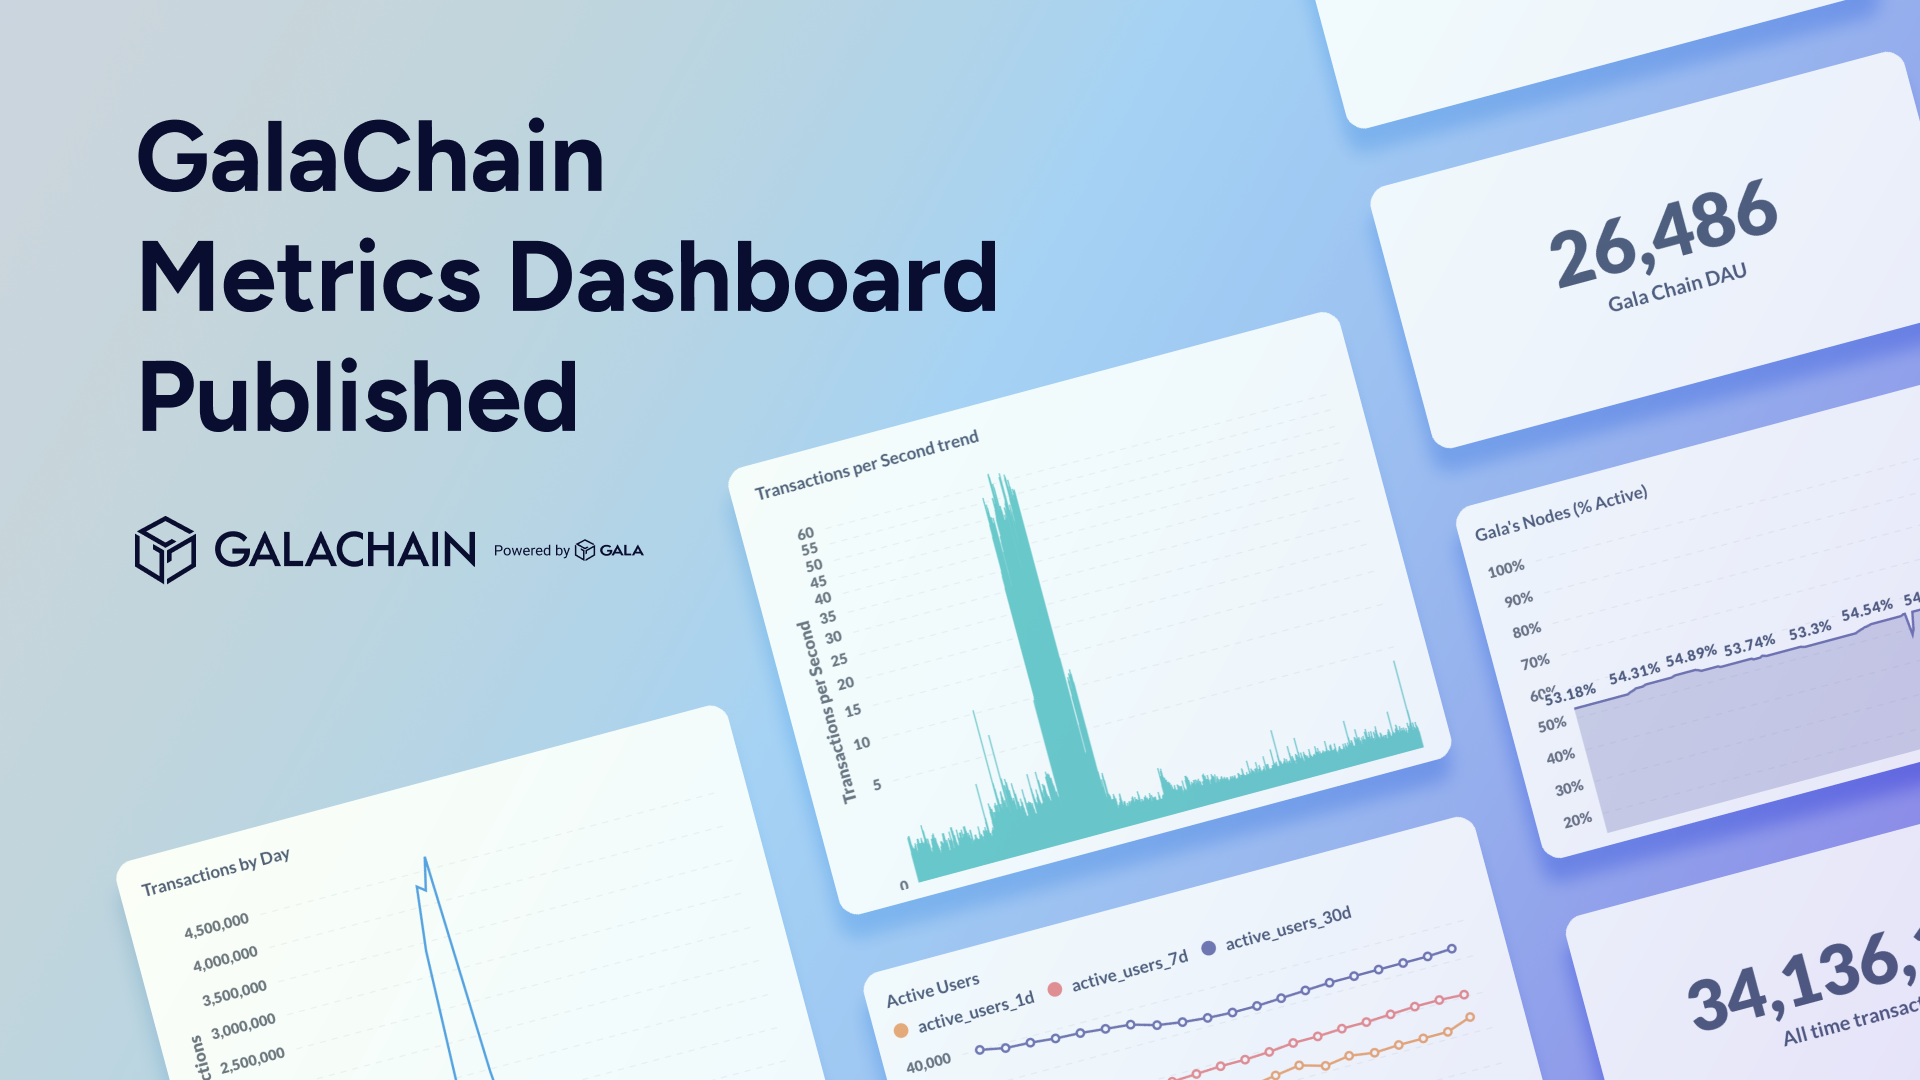 GalaChain has released its public analytics page, with transparent blockchain metrics.